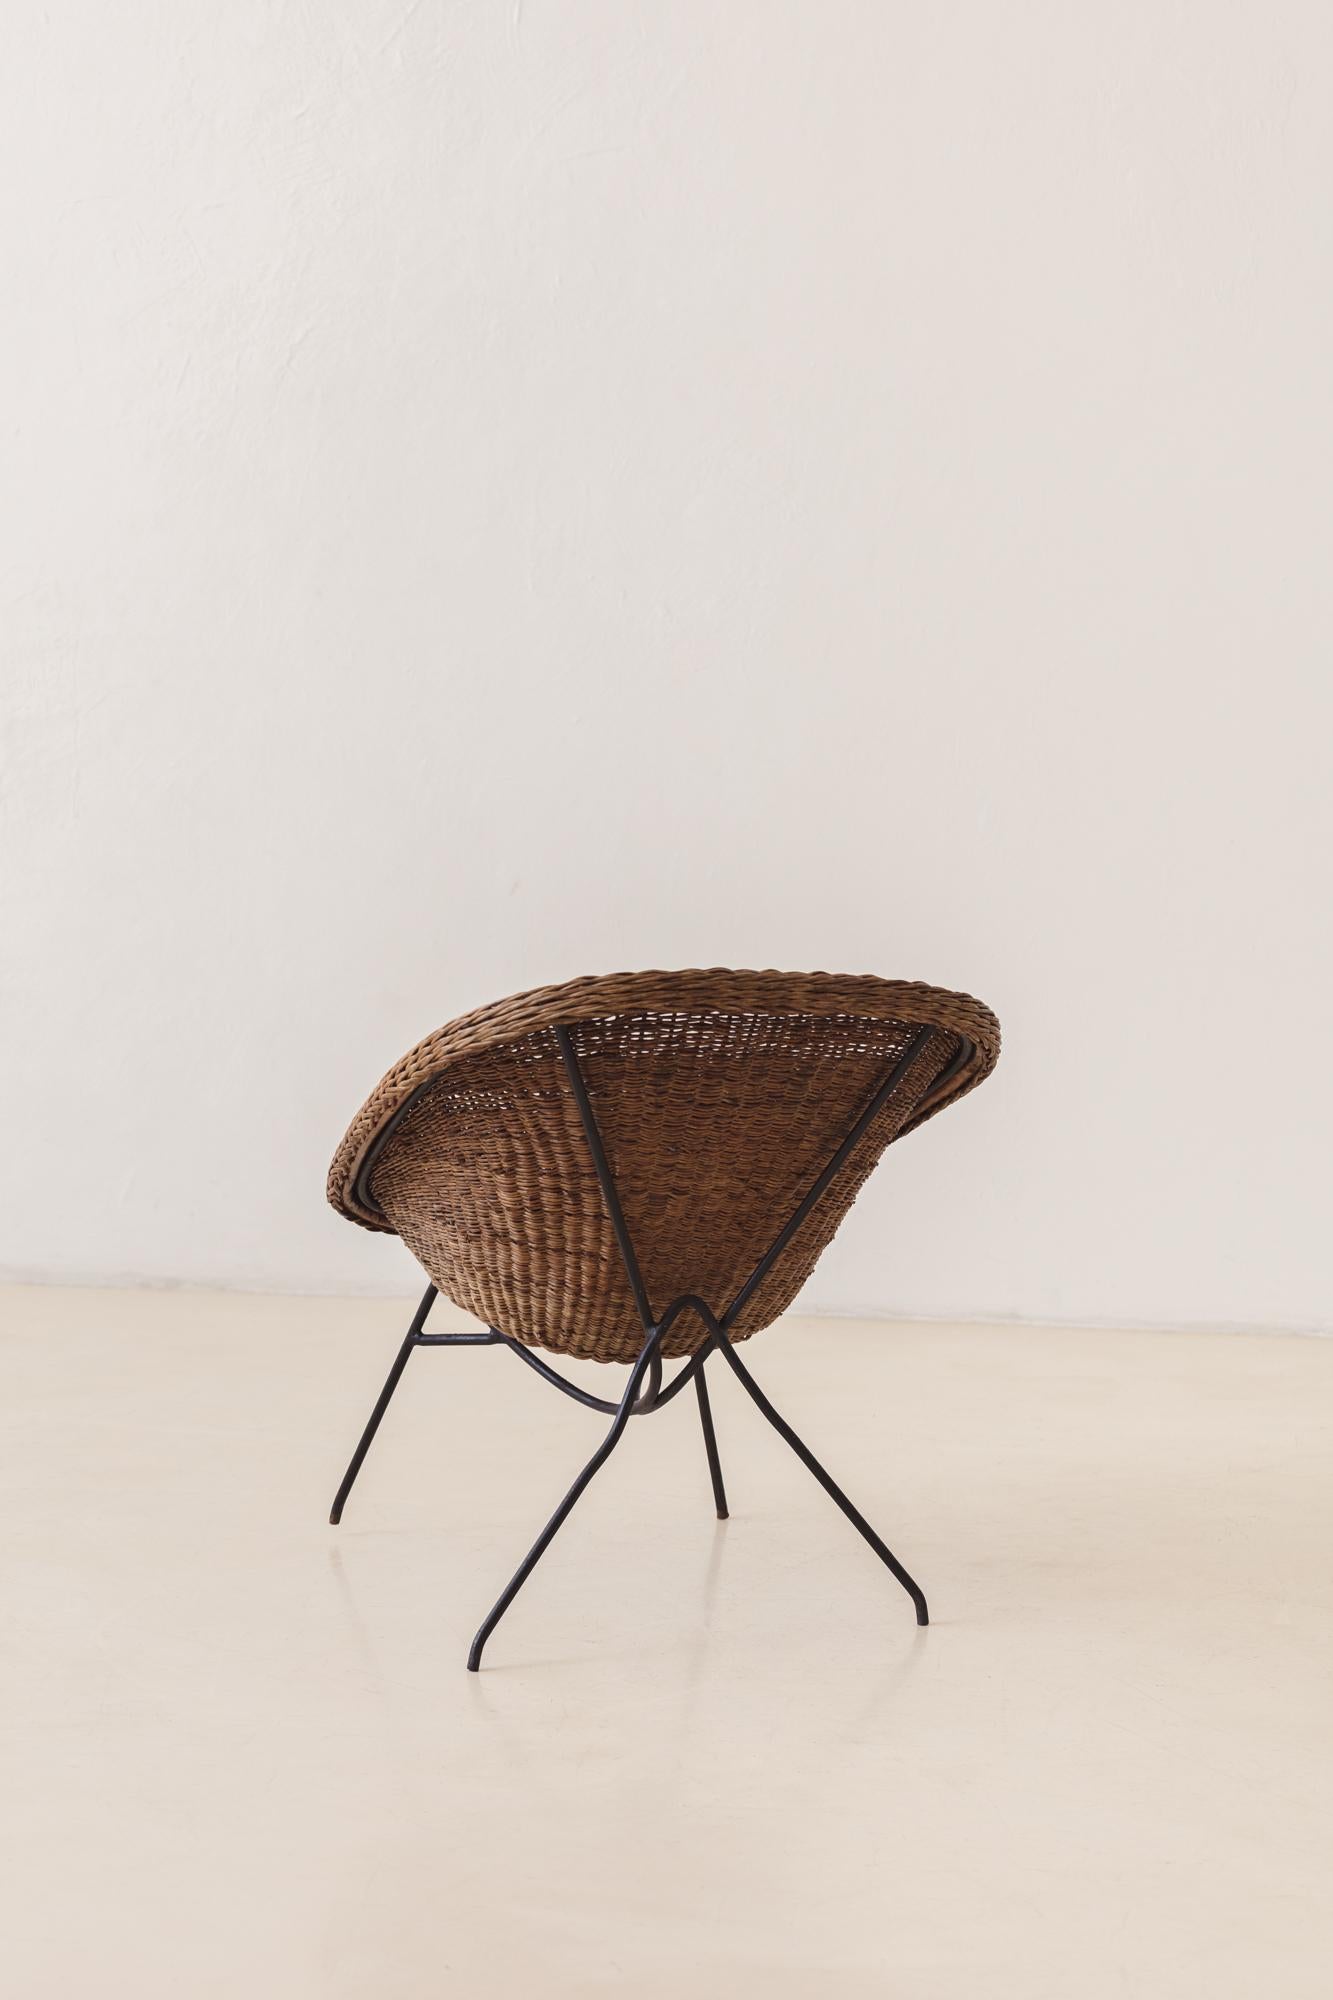 Mid-20th Century Wicker and Iron Armchair, Unknown Designer, Brazilian Midcentury Modern, c. 1955 For Sale